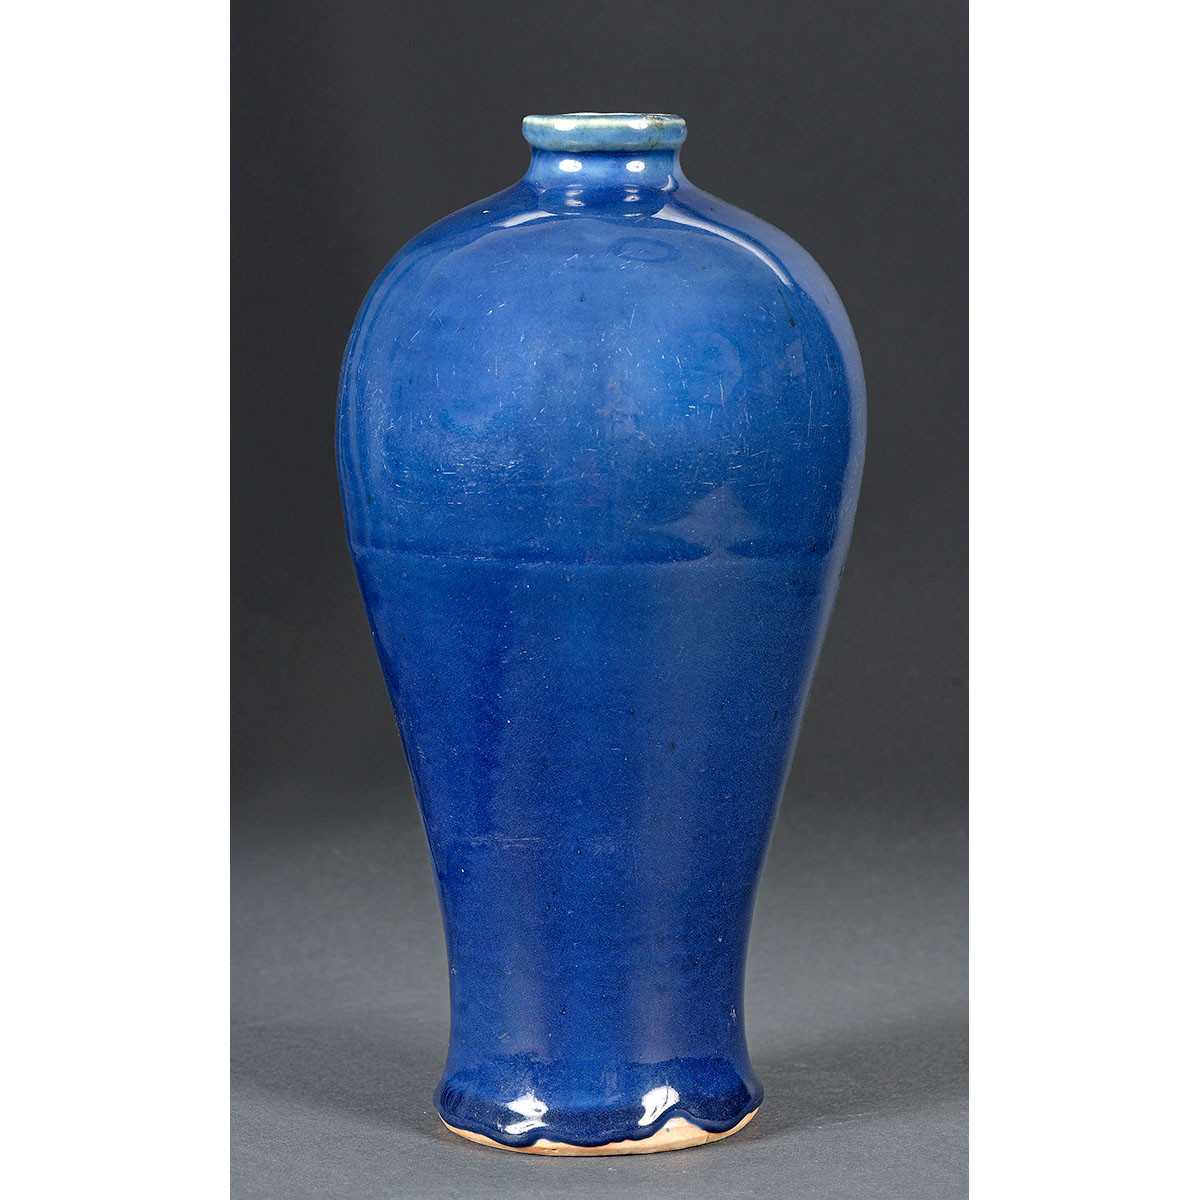 27 Recommended Chinese Meiping Vase 2024 free download chinese meiping vase of arts dasie millon riviera gauchet asian art intended for lot 169 a chinese ming dynasty blue glazed porcelain meiping